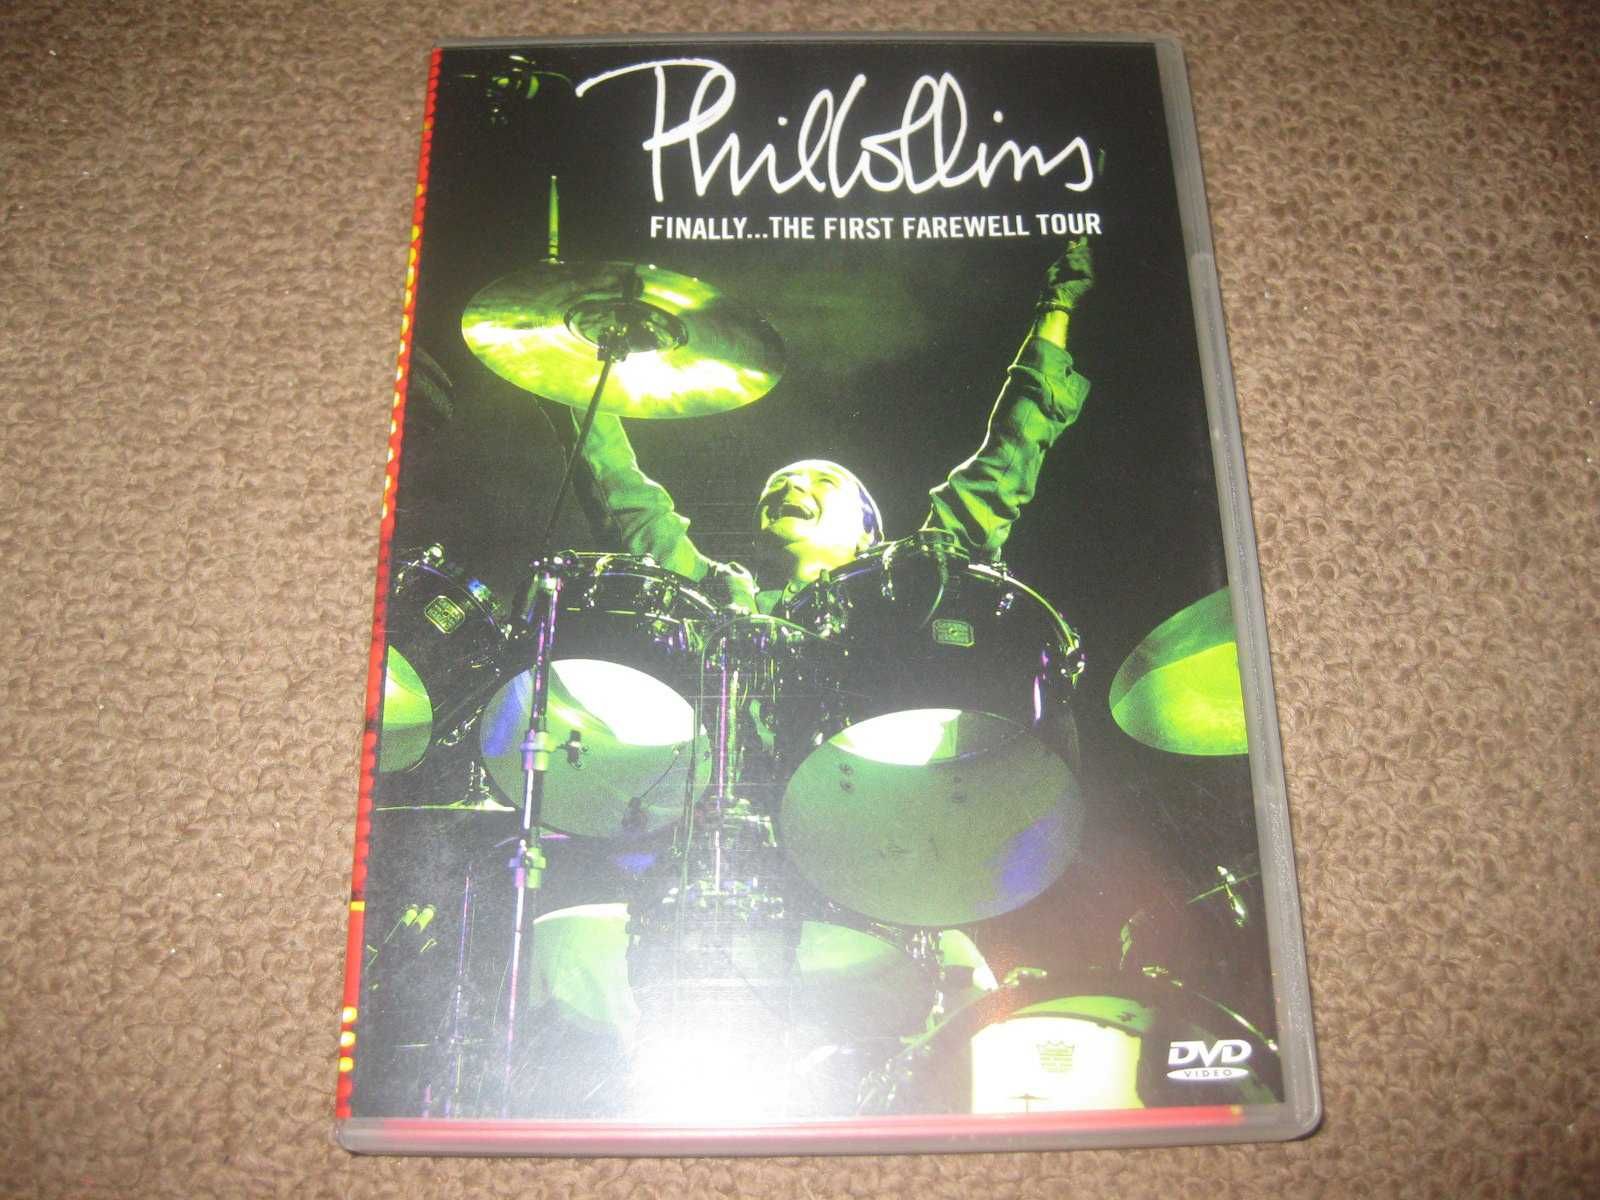 DVD Musical do Phil Collins "Finally...The First Farewell Tour"